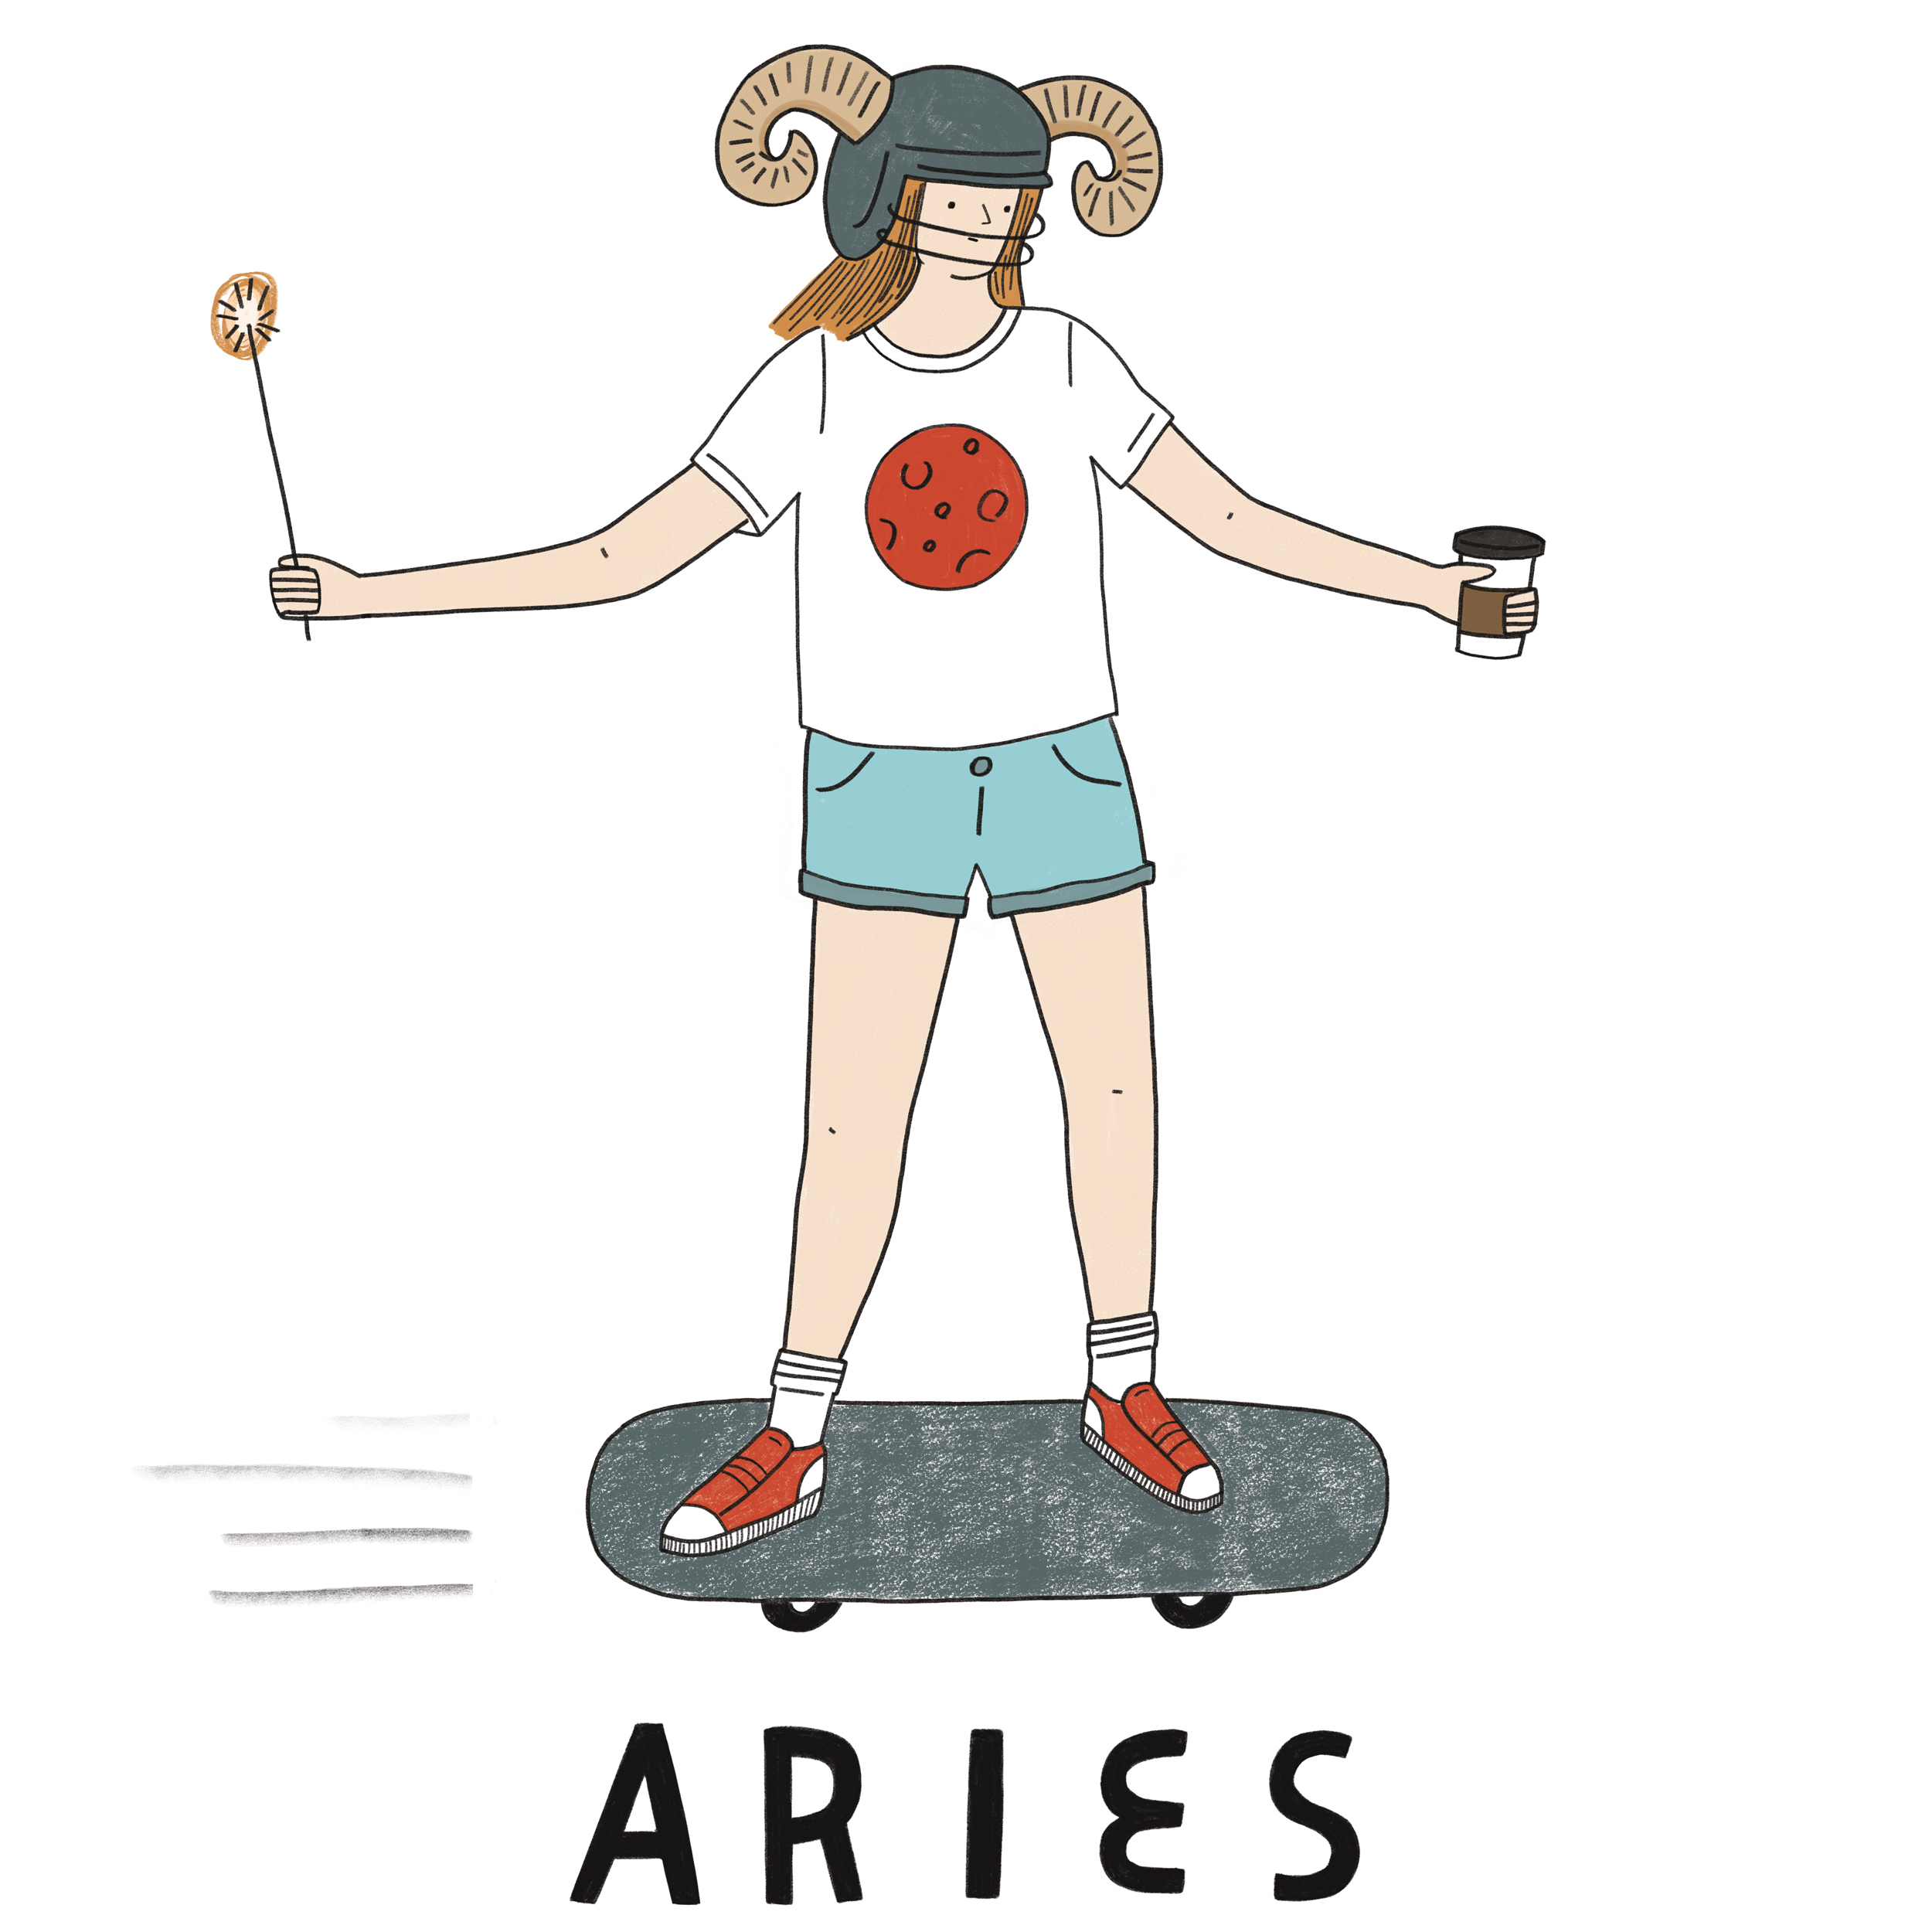 Aries personality and aesthetic personified. 